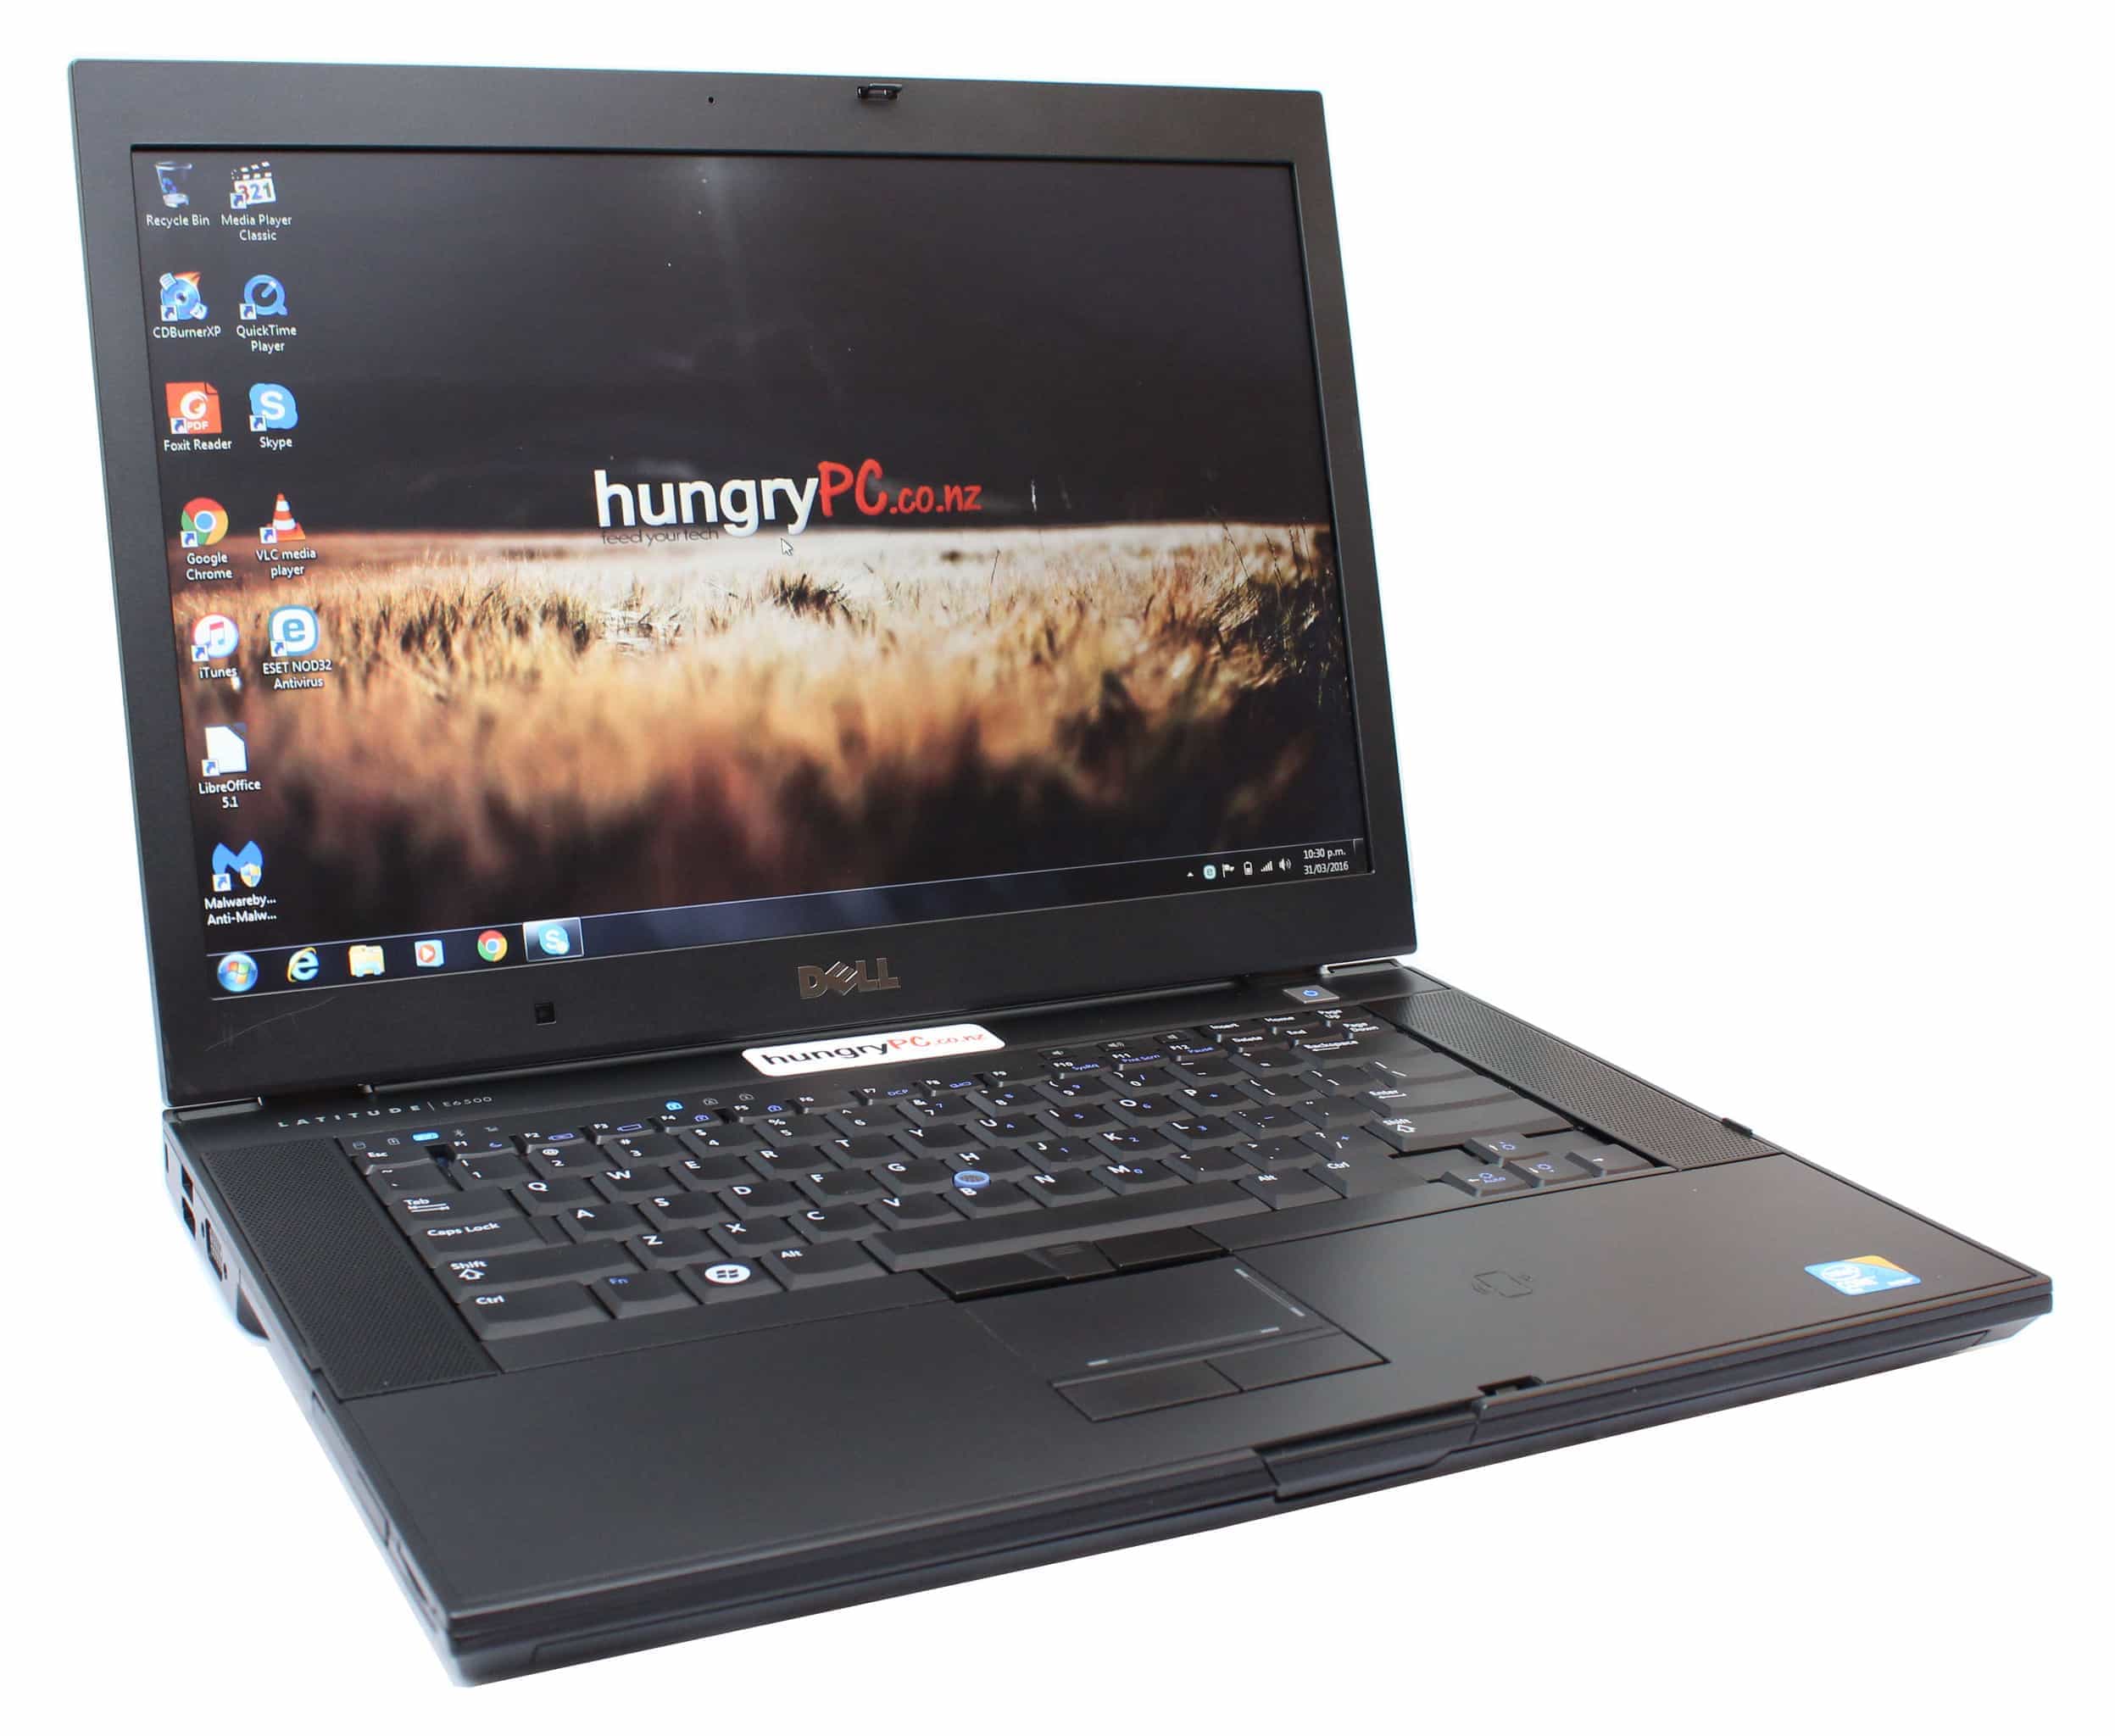 Buy the *BEST PRICE* Dell 15.4" Laptop with Windows 10/7 from hungryPC